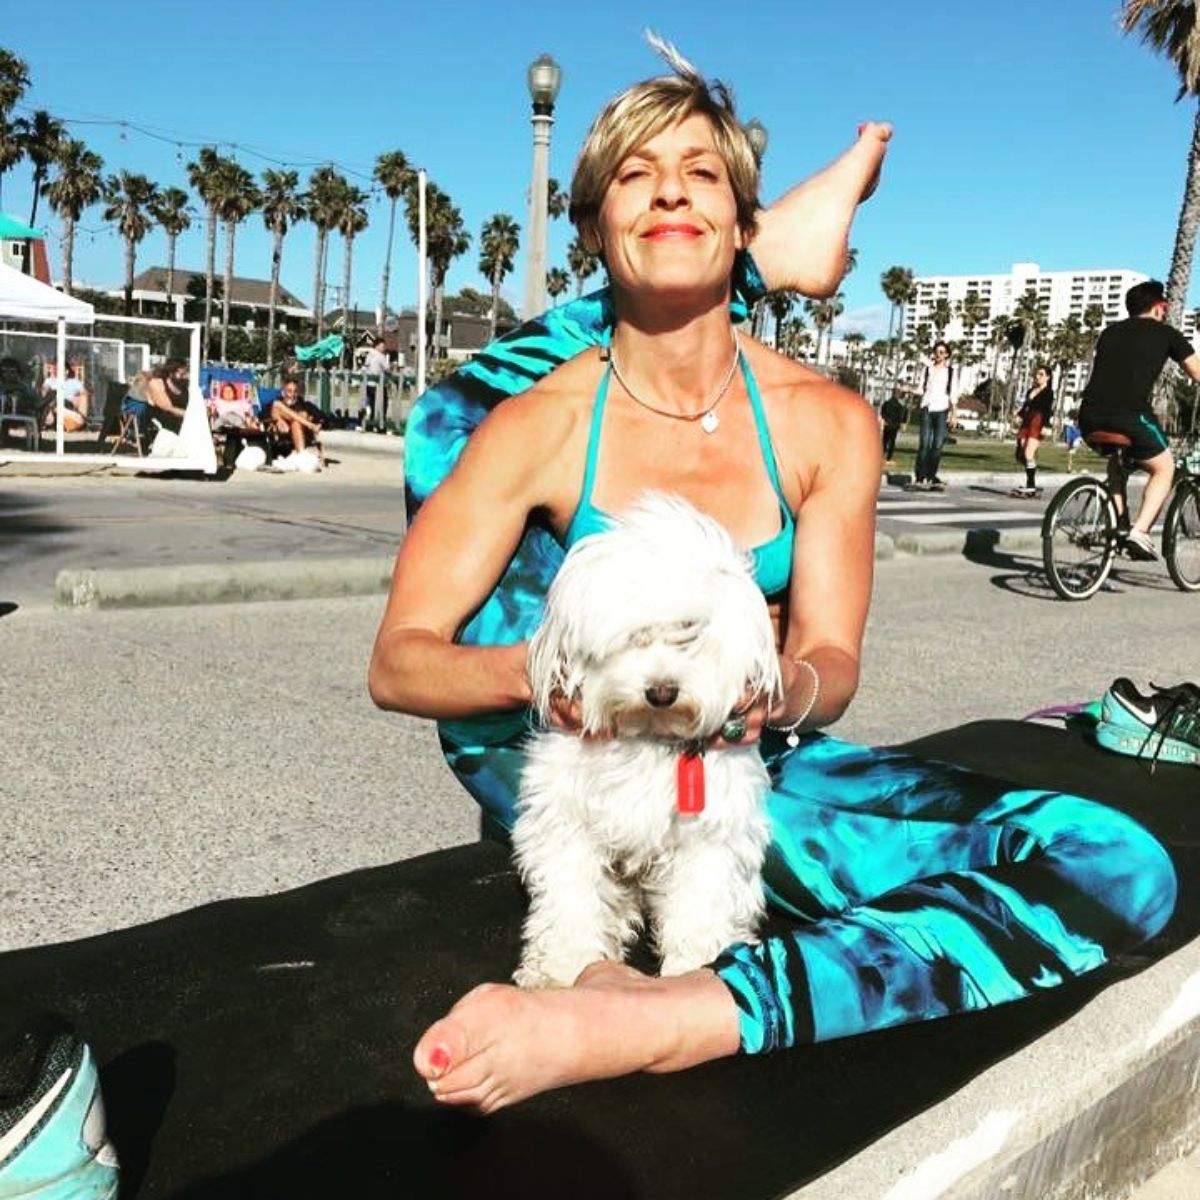 fluffy white dog held by a woman while she's doing yoga with one back leg over her neck